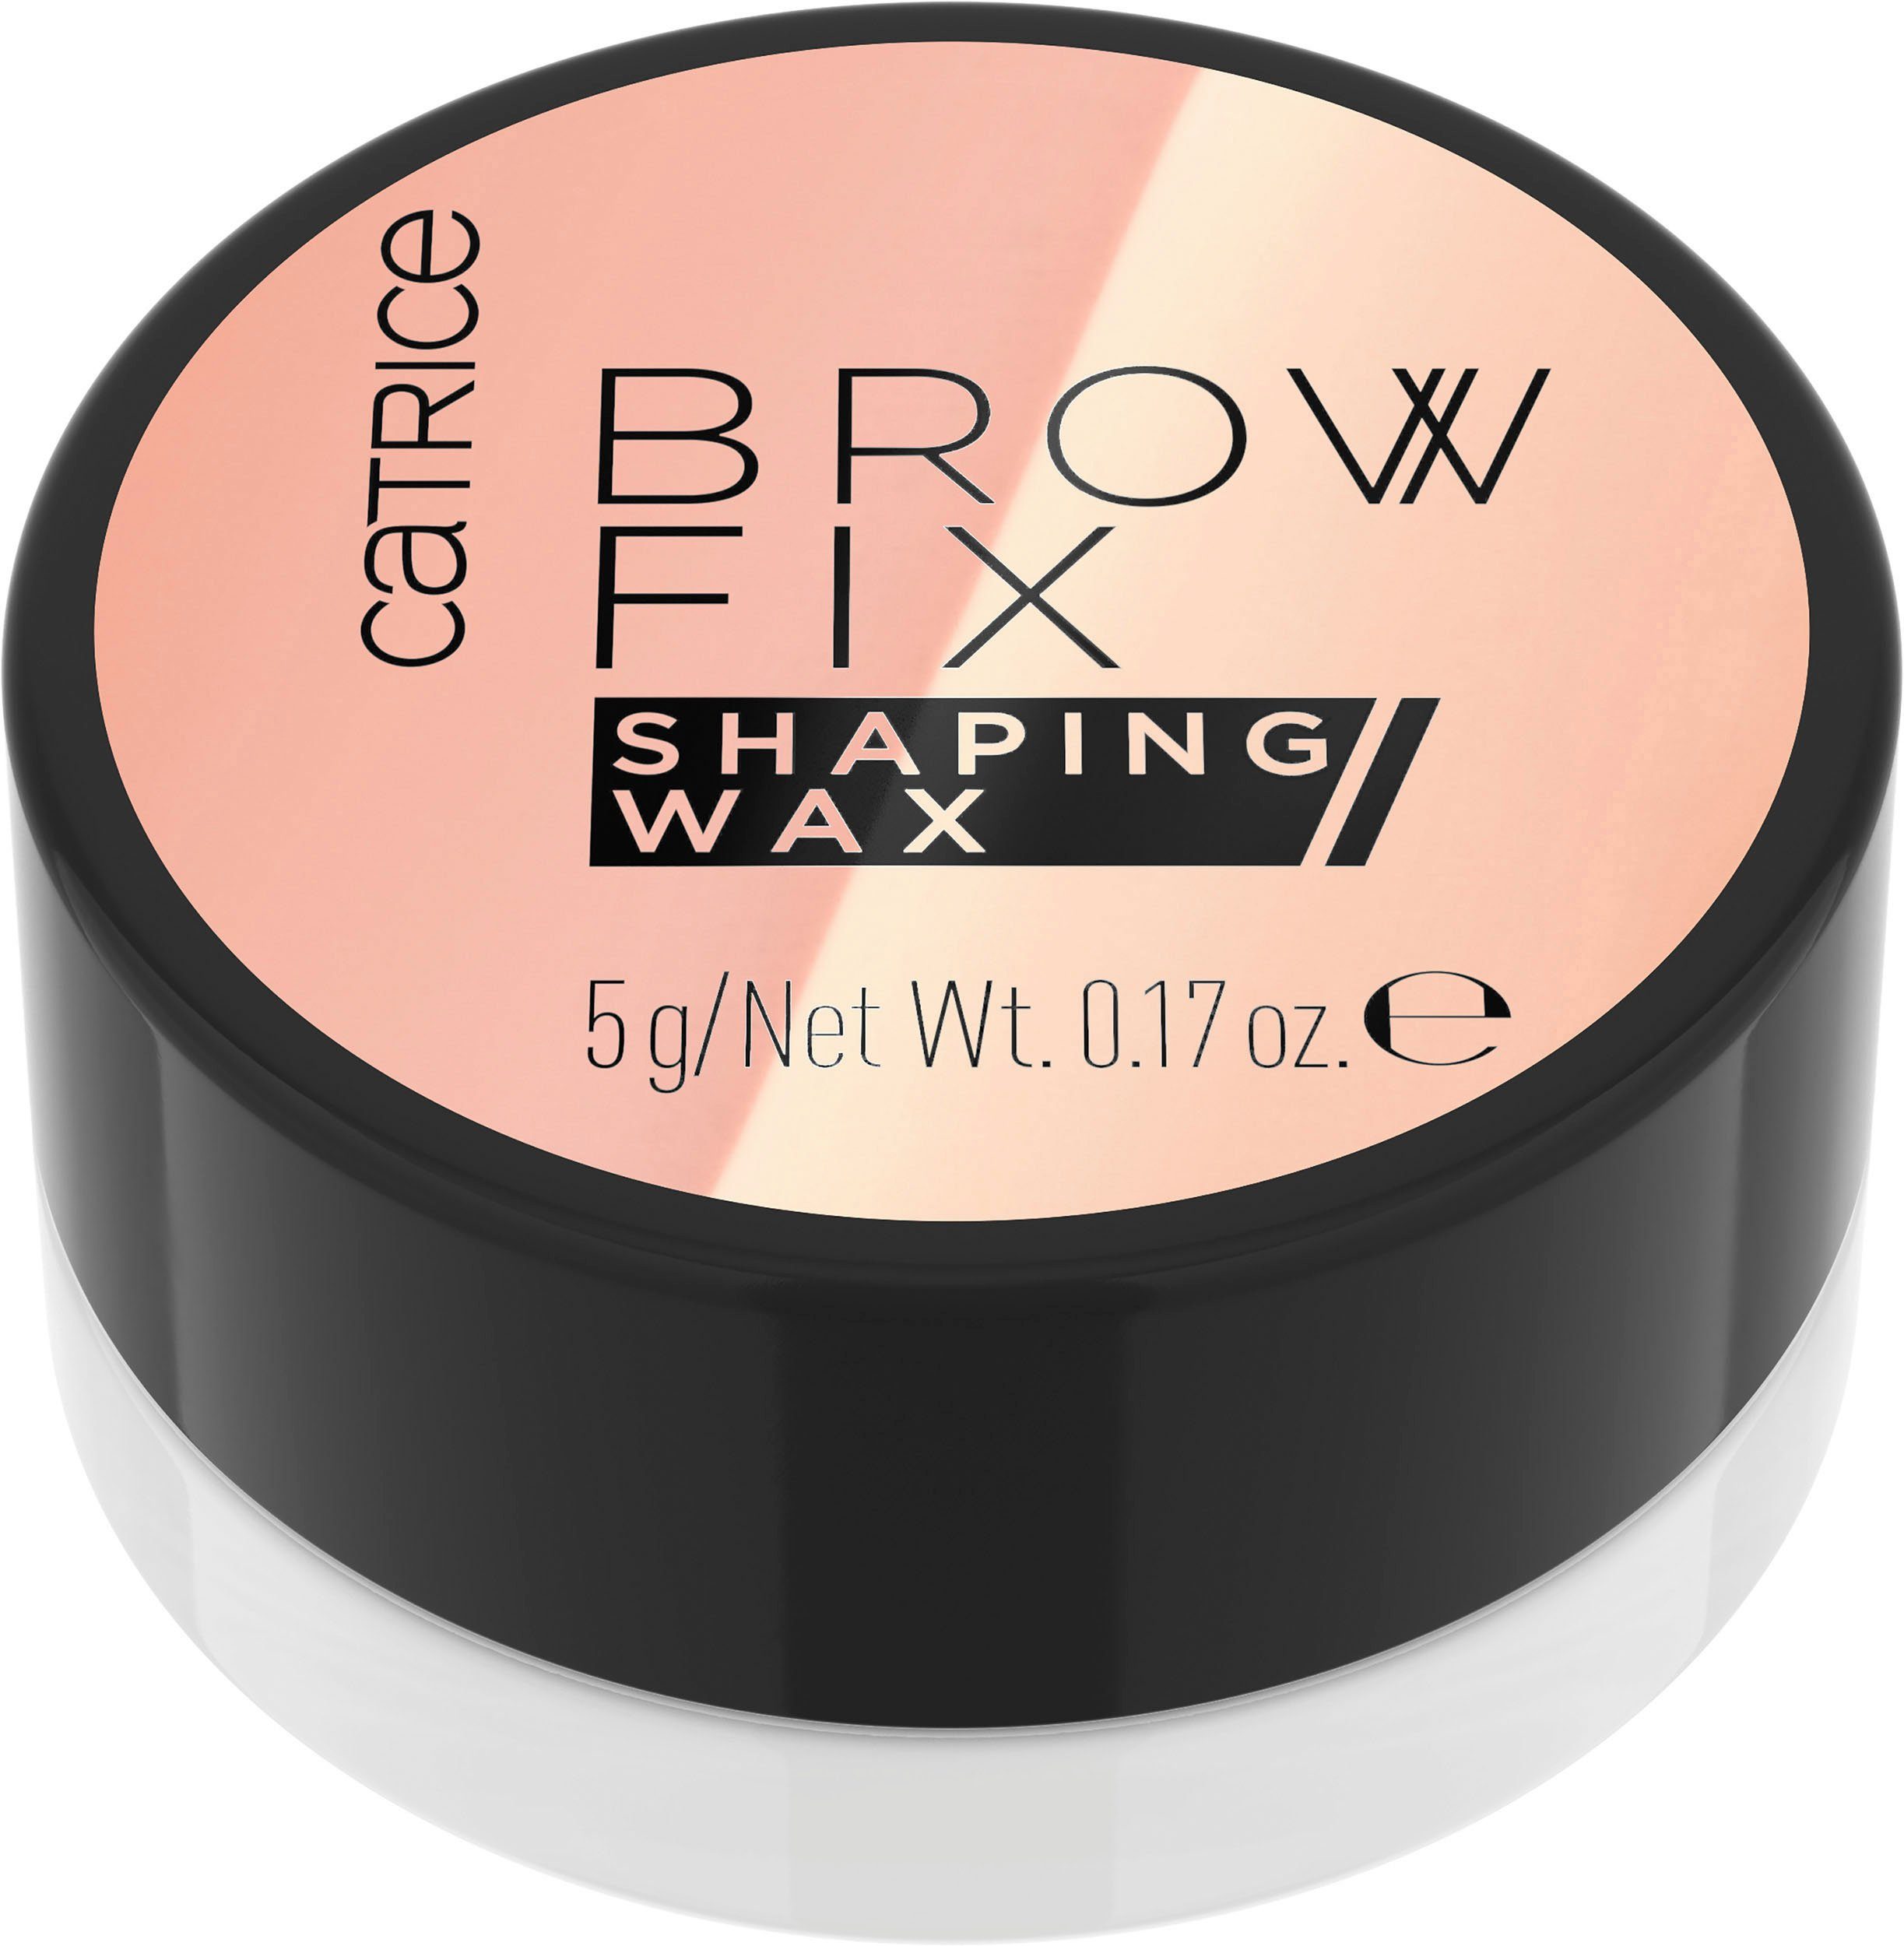 Catrice Augenbrauen-Gel Catrice Brow Fix Shaping 010, Wax 3-tlg